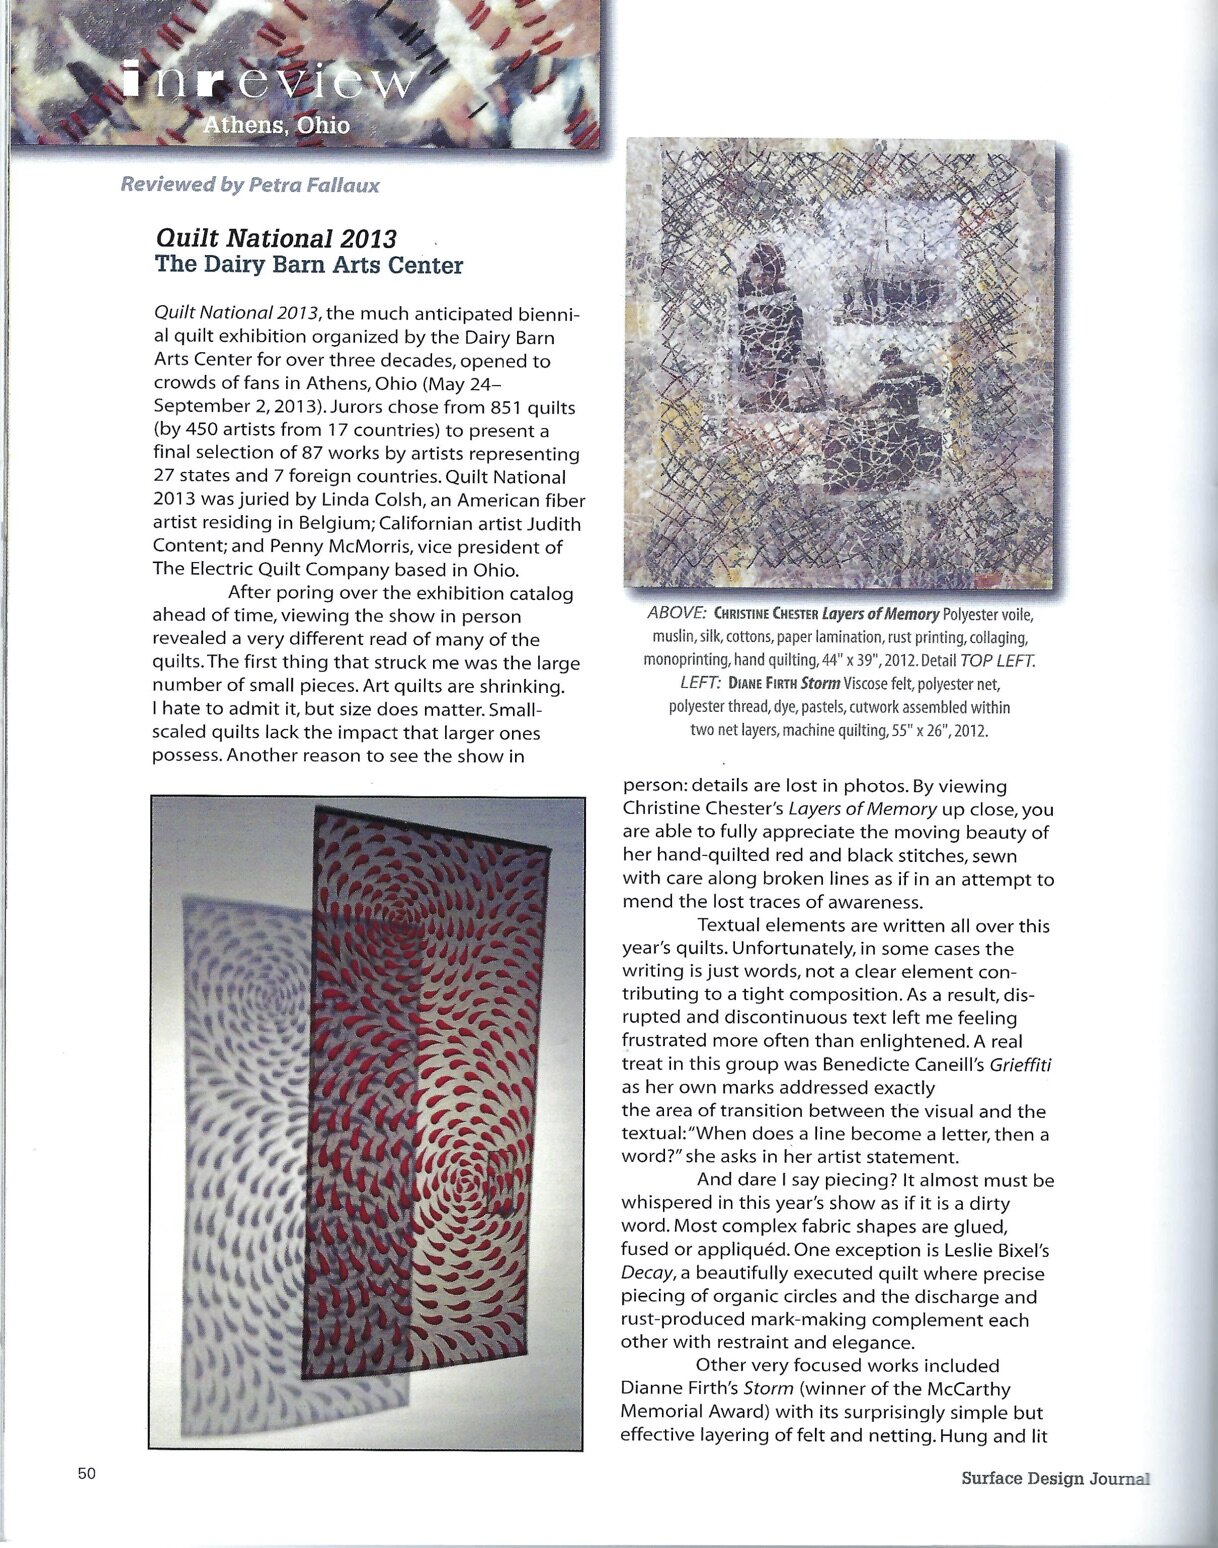 1Review Quilt National'13 SurfaceDesignJournal.jpg